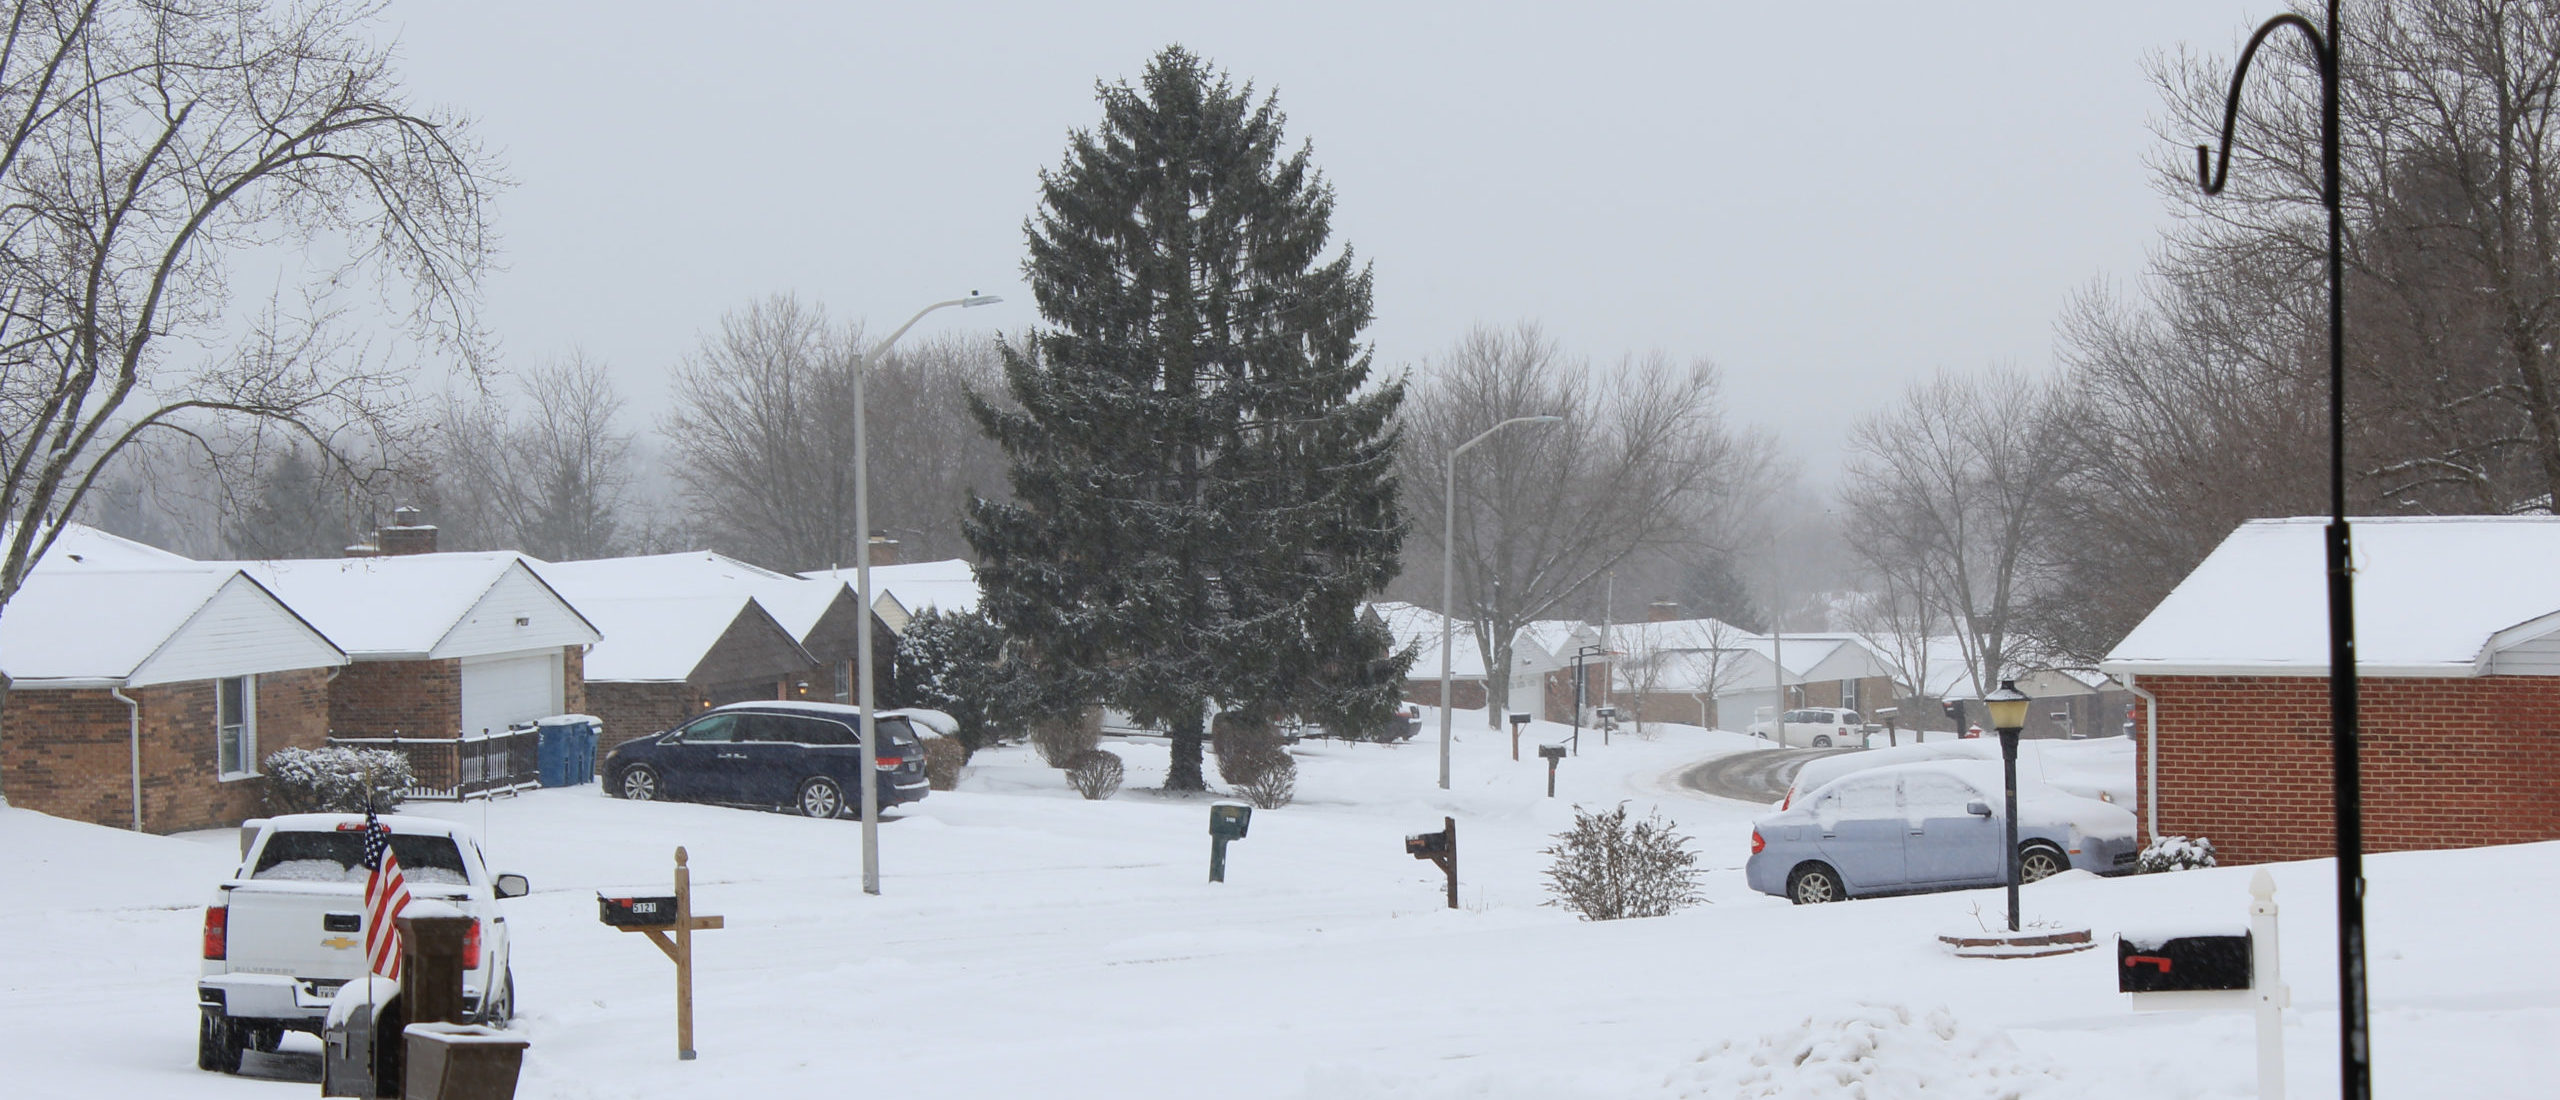 Dayton, Ohio, Breaks Snowfall Record As Winter Storms Batter US The